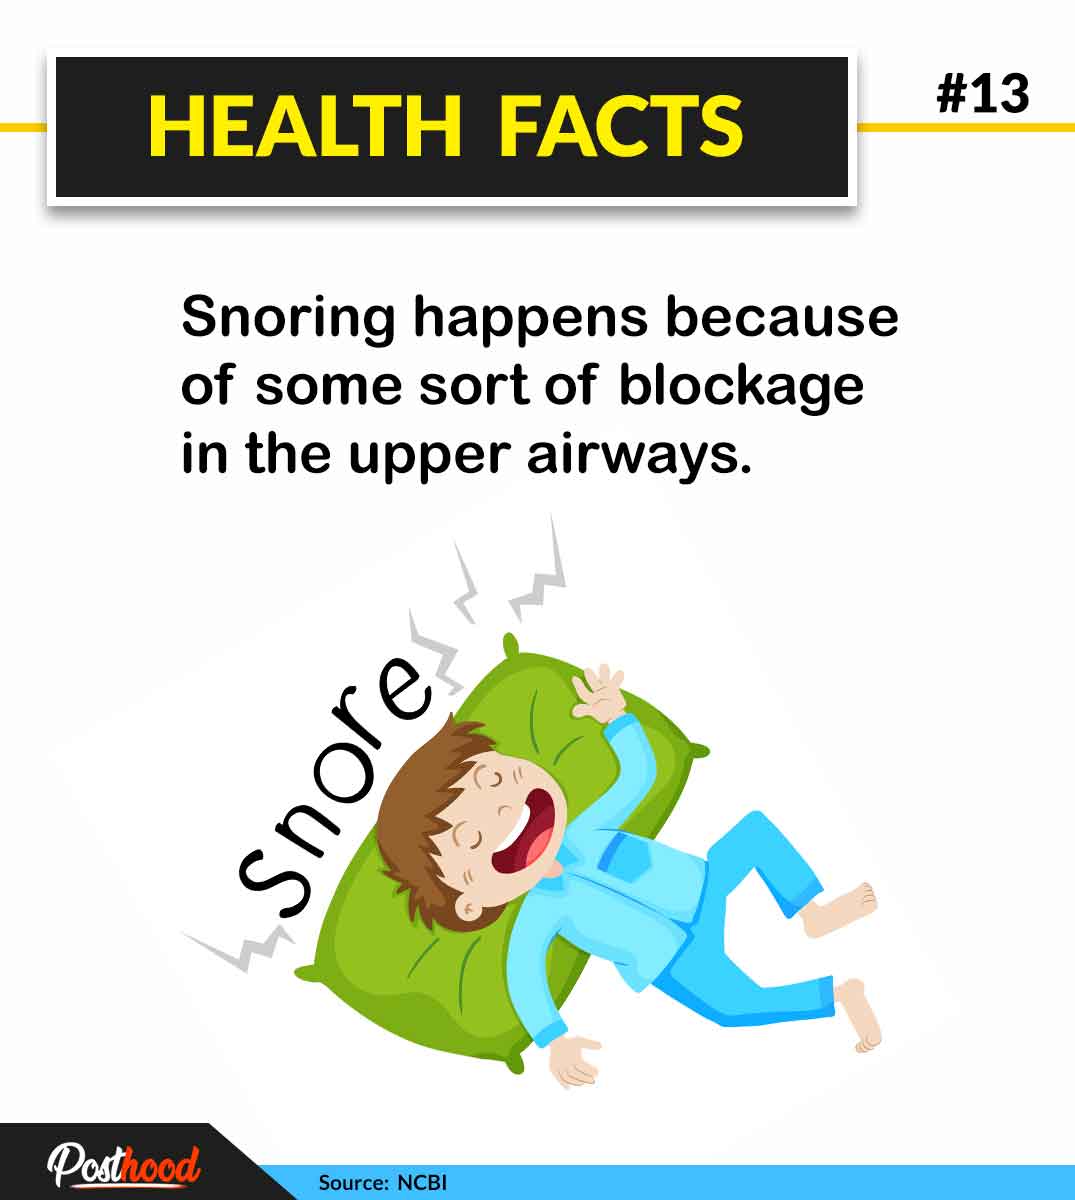 Do you know this shocking health facts about snoring? Improve your sleeping habits while educating yourself these amazing sleep facts.